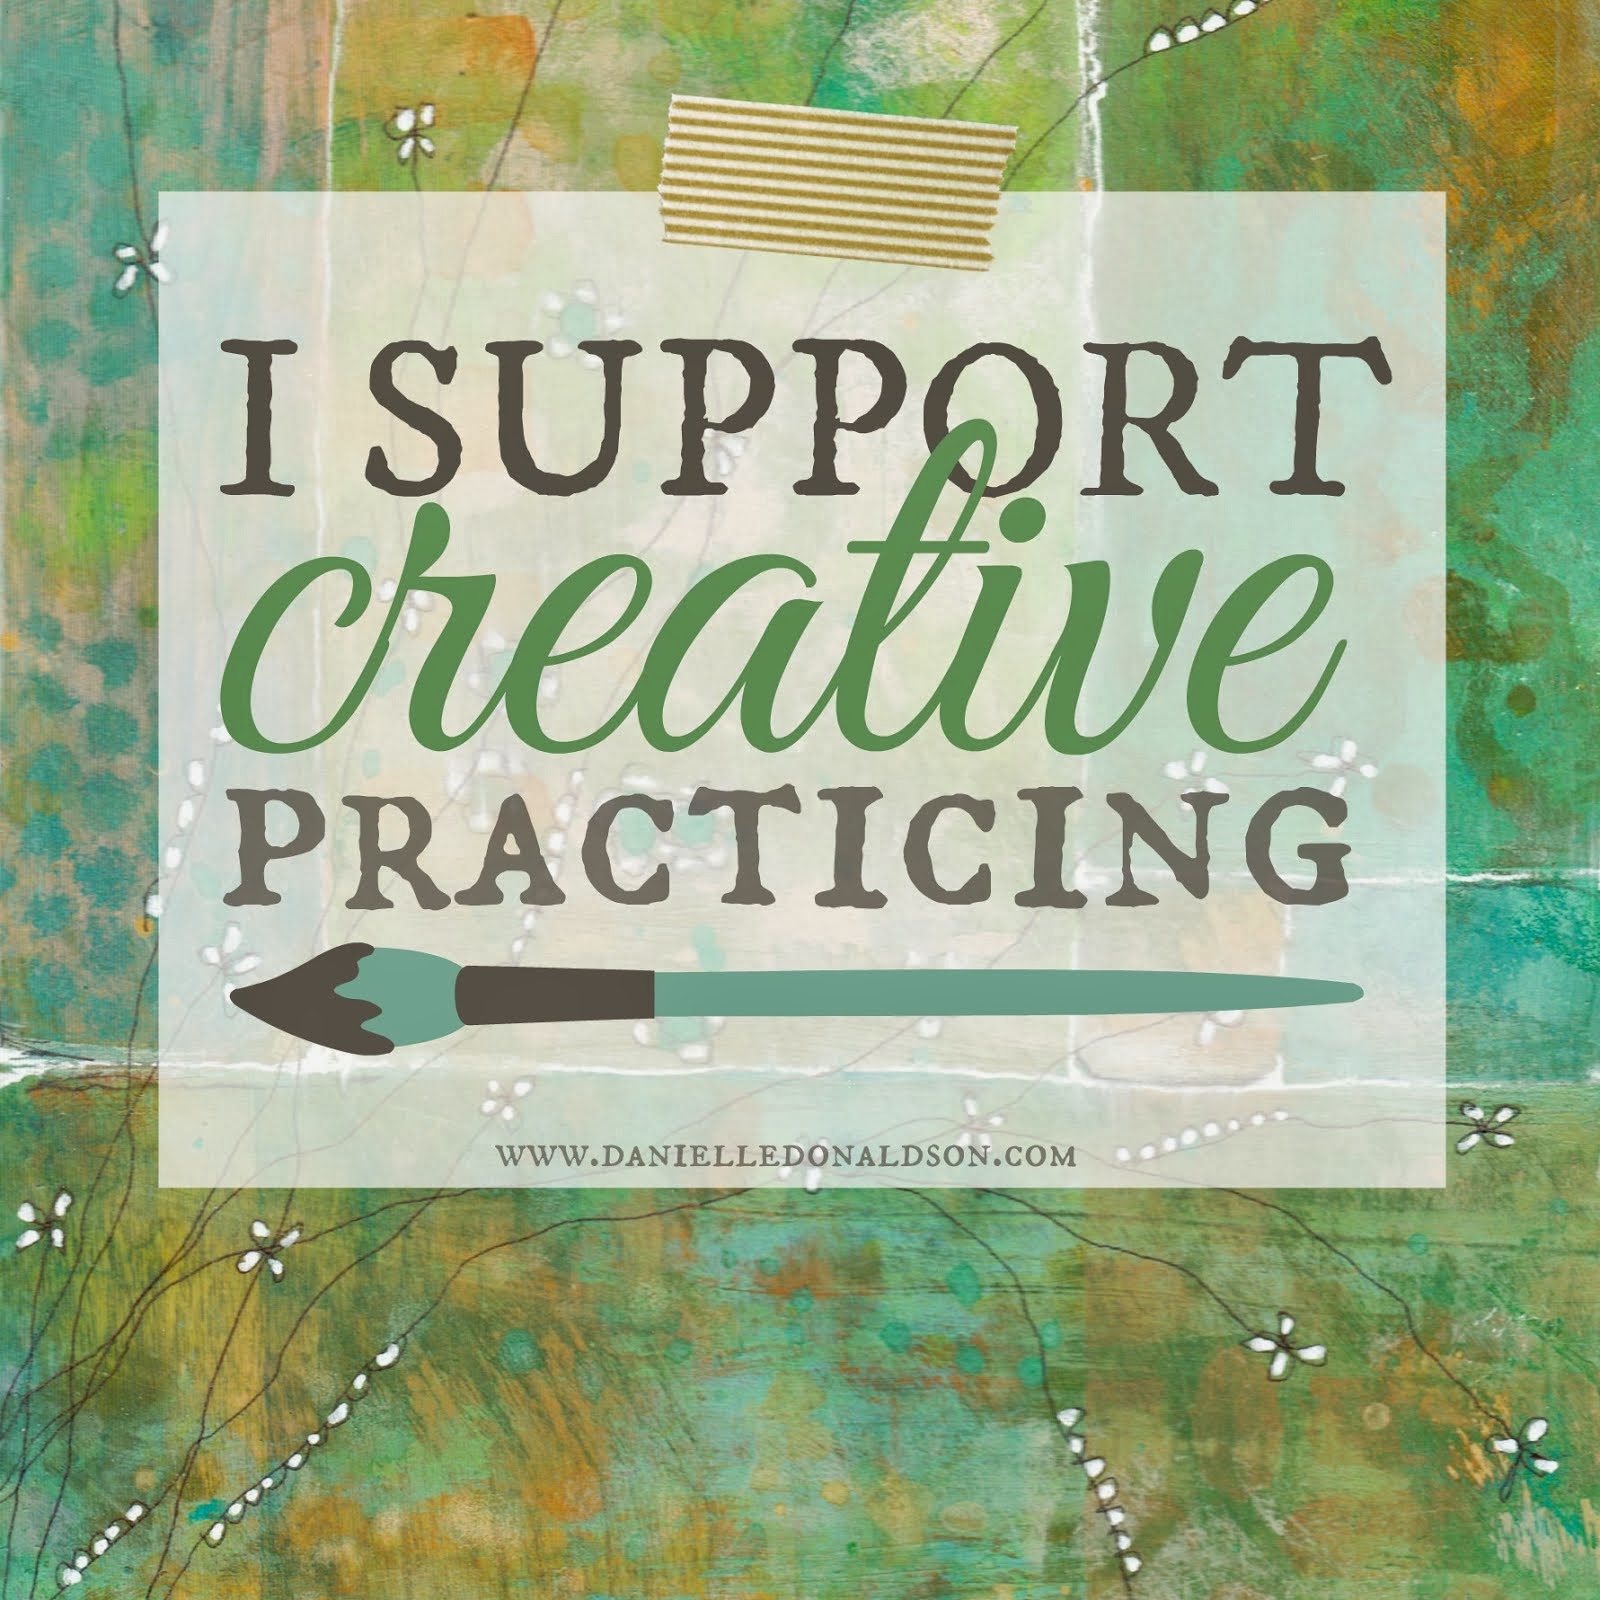 I Support Creative Practicing